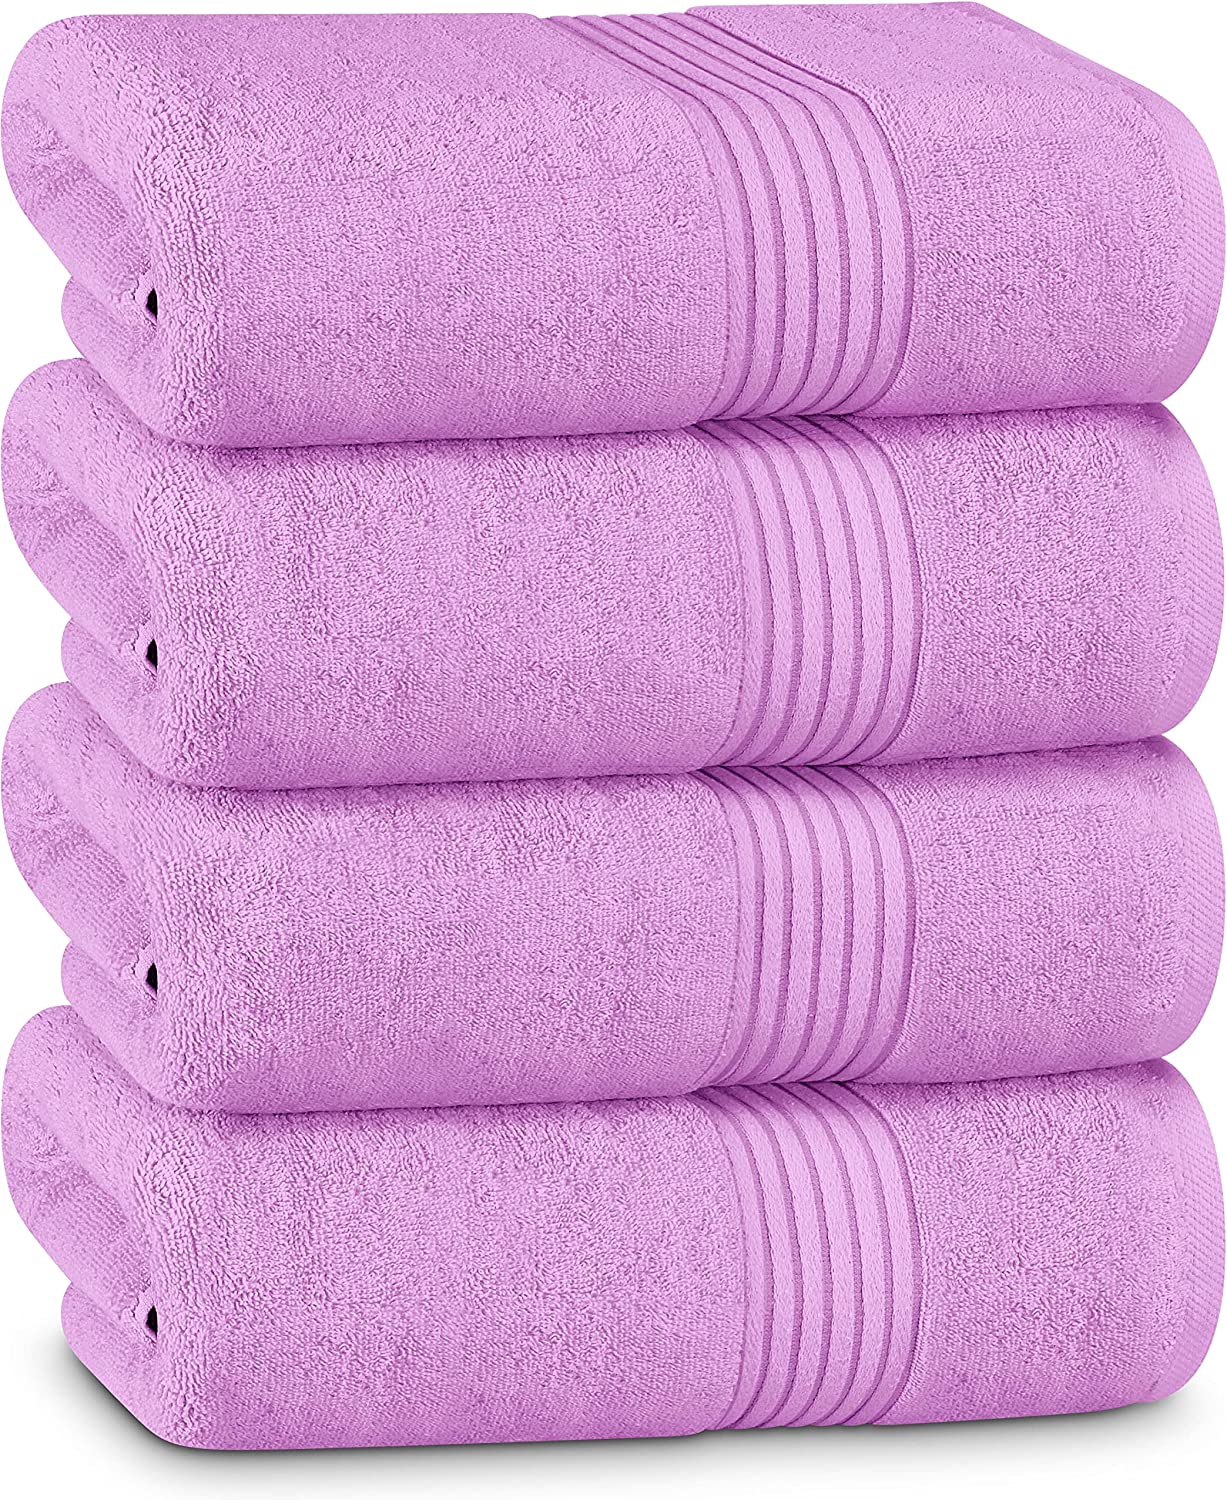 Utopia Towels - 6 Pack Viscose Hand Towels Set, (16 x 28 inches) 100% Ring  Spun Cotton, Ultra Soft and Highly Absorbent 600GSM Towels for Bathroom,  Gym, Shower, Hotel, and Spa (Grey) - Yahoo Shopping